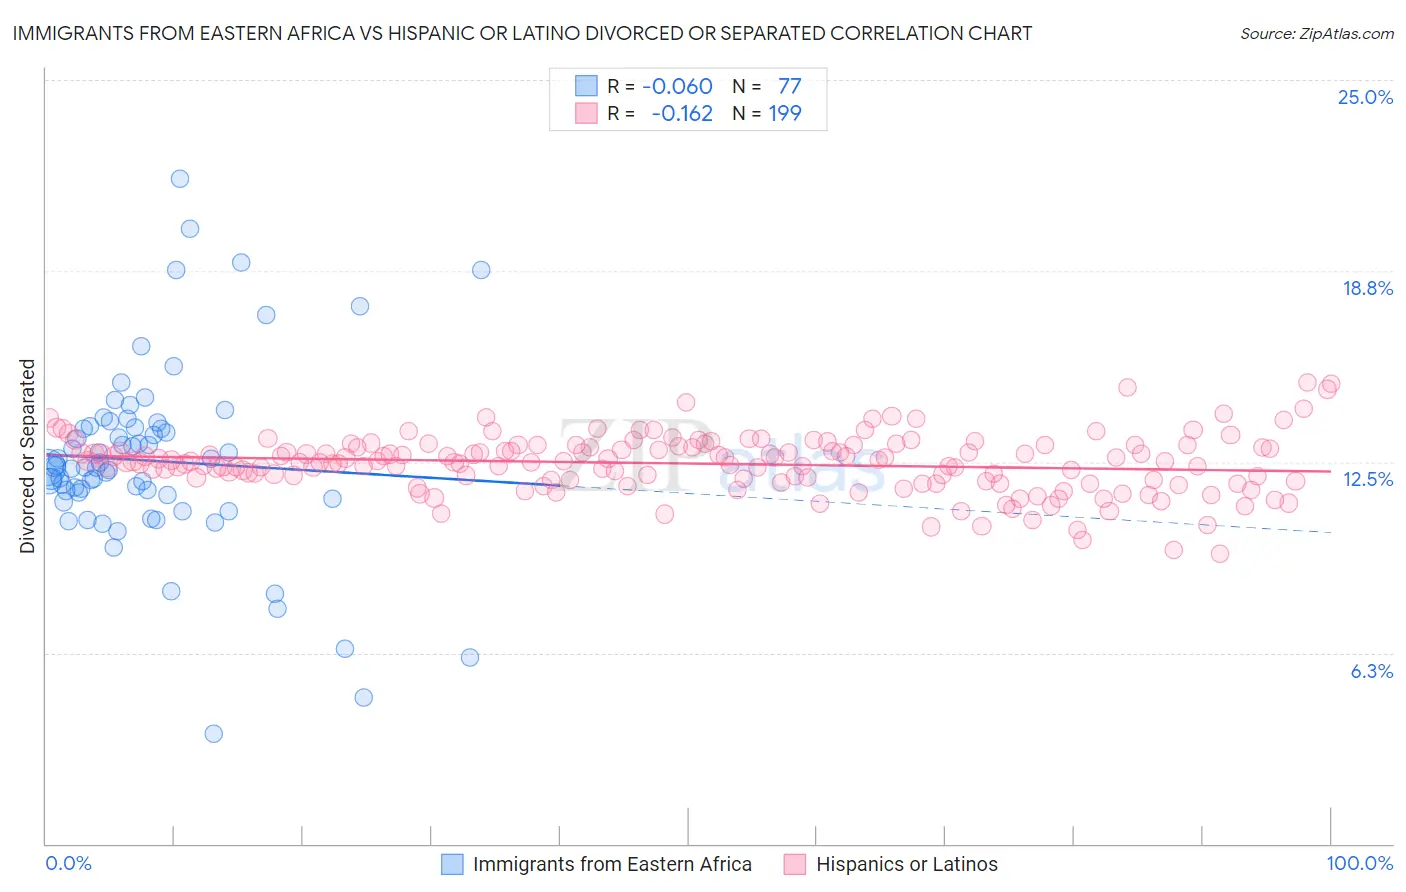 Immigrants from Eastern Africa vs Hispanic or Latino Divorced or Separated